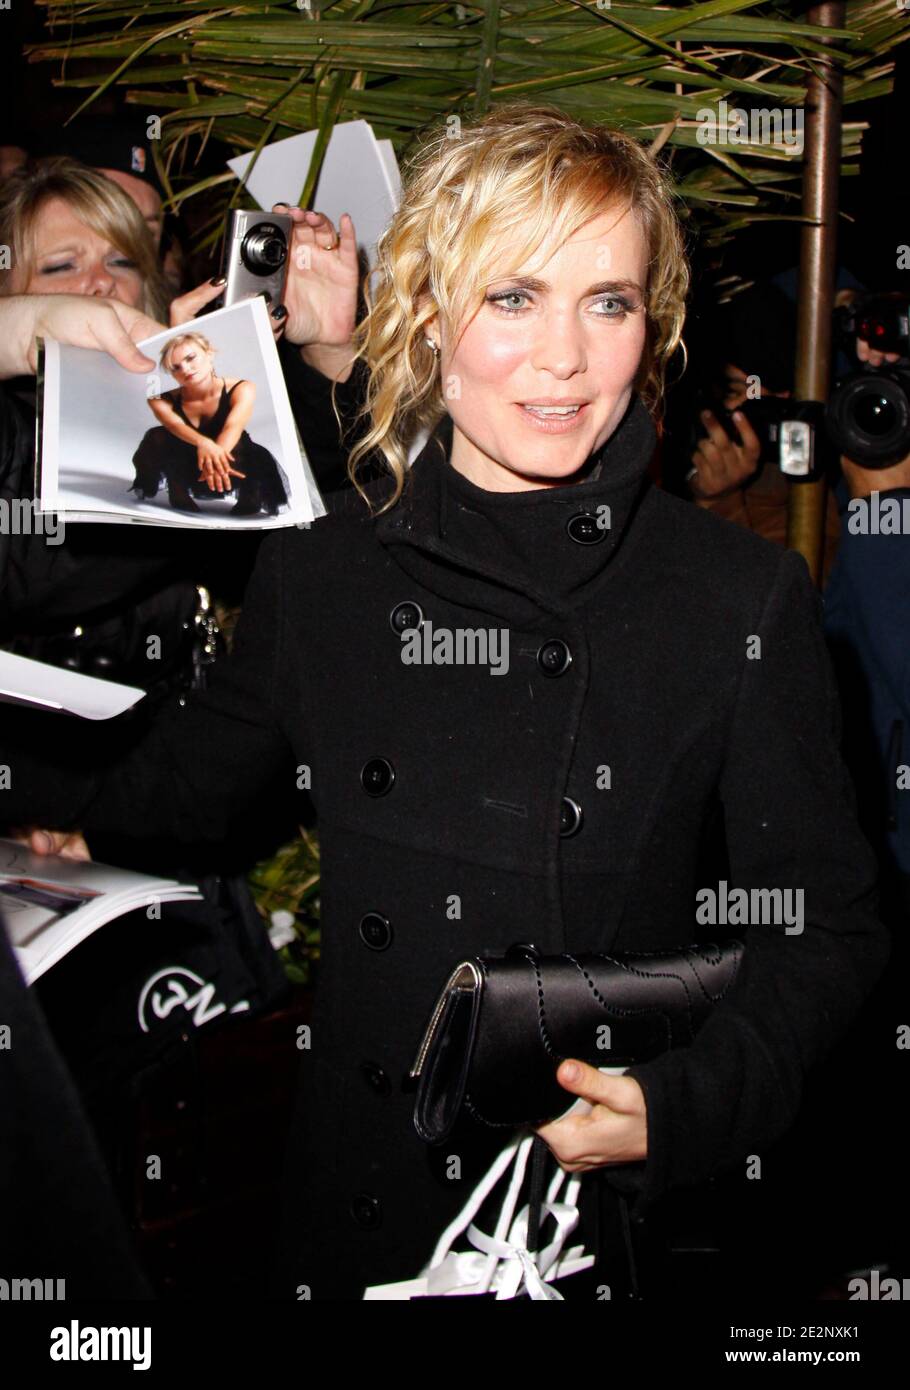 Radha Mitchell arriving for Chanel Hosts Pre-Oscar Dinner With Charles Finch held at Madeo Restaurant in Los Angeles, CA, USA, on March 06, 2010. Photo by Tony DiMaio/ABACAPRESS.COM (Pictured : Radha Mitchell) Stock Photo